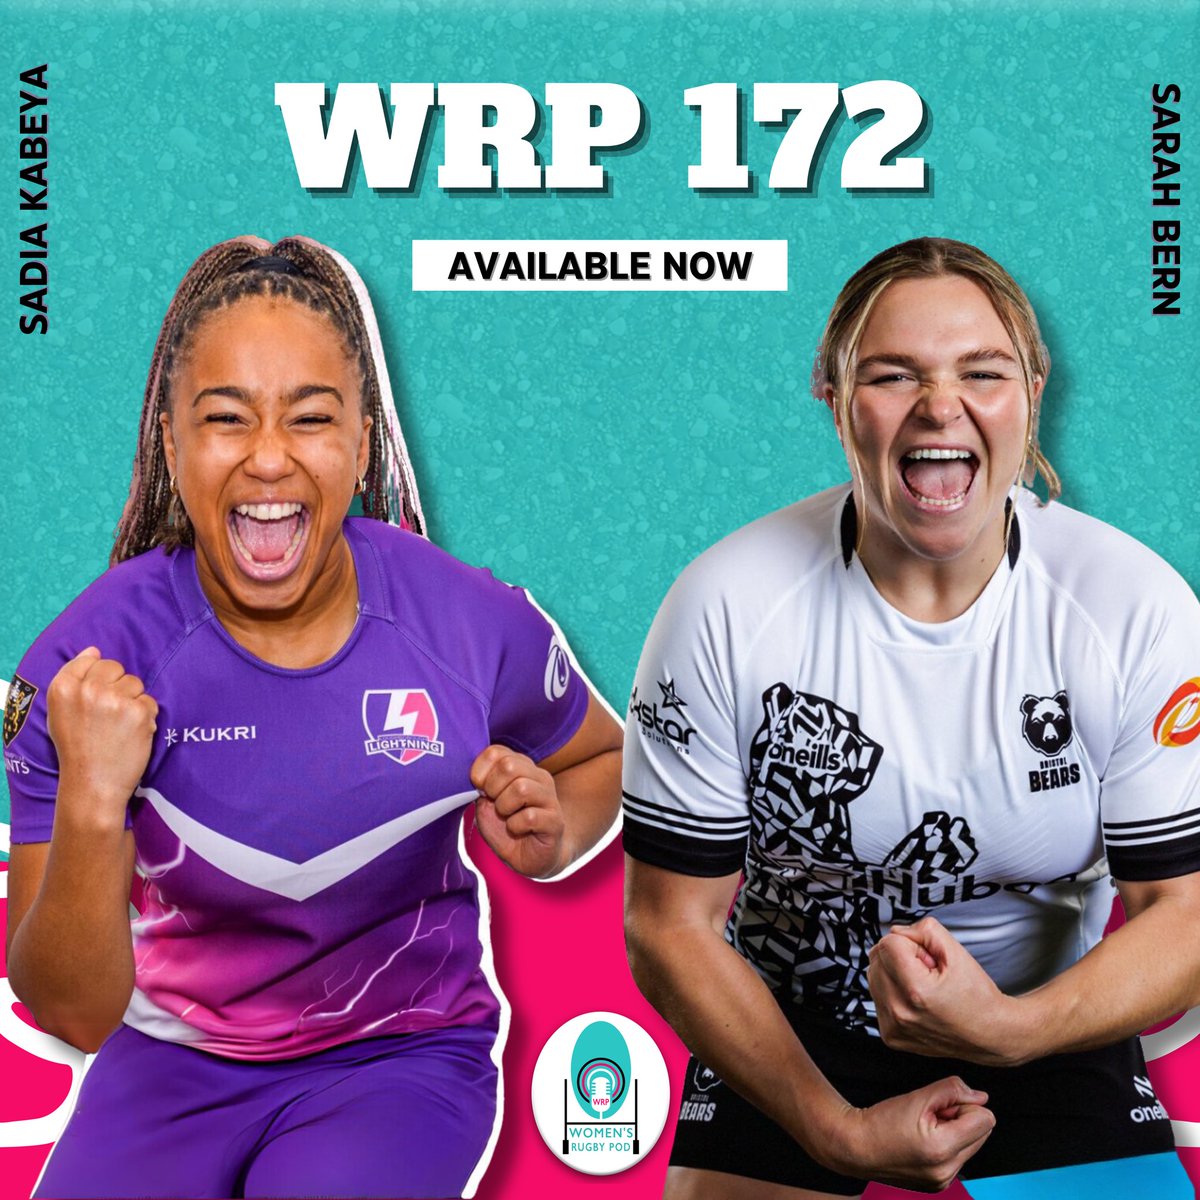 𝐖𝐑𝐏 𝟏𝟕𝟐 Join us this week as @SadiaKabeya & @SarahLily2468 join Johnnie discussing the past week in Women’s Rugby! 🏆 PWR 🌹 Red Roses 🏆 Celtic Challenge 🏉 Sevens 🌍 Global Game 📰 World Rugby News 🎧 linktr.ee/WomensRugbyPod #WRP #WomensRugby #Rugby  #PWR #WXV